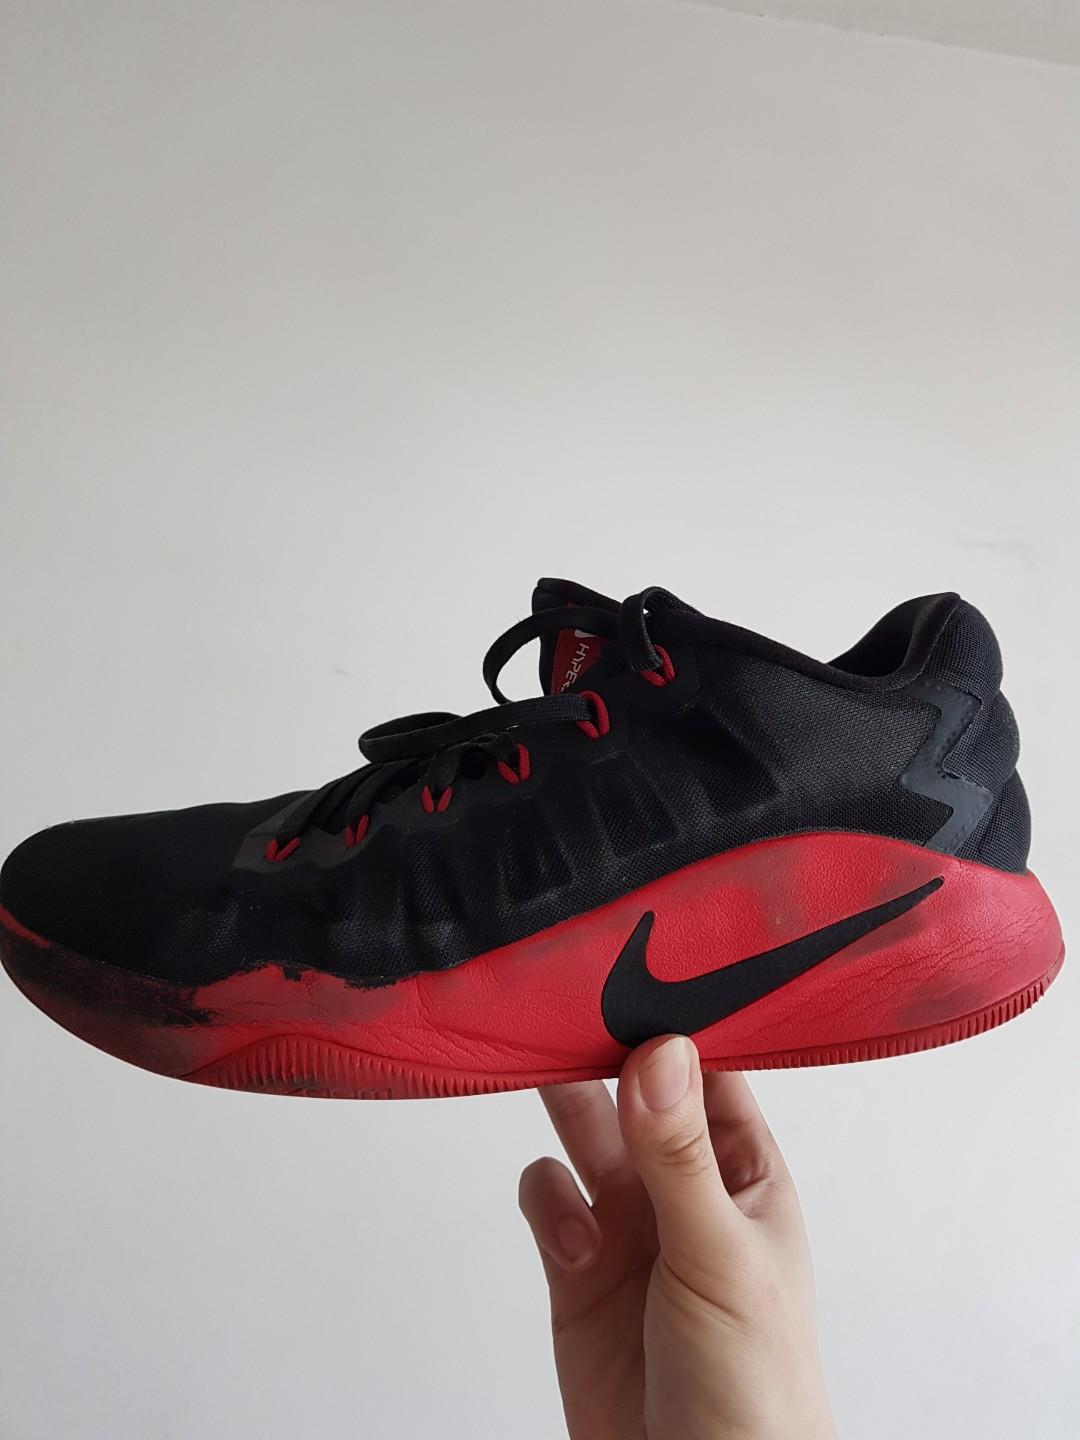 Nike 2016 low (can nego), Men's Fashion, Footwear, on Carousell